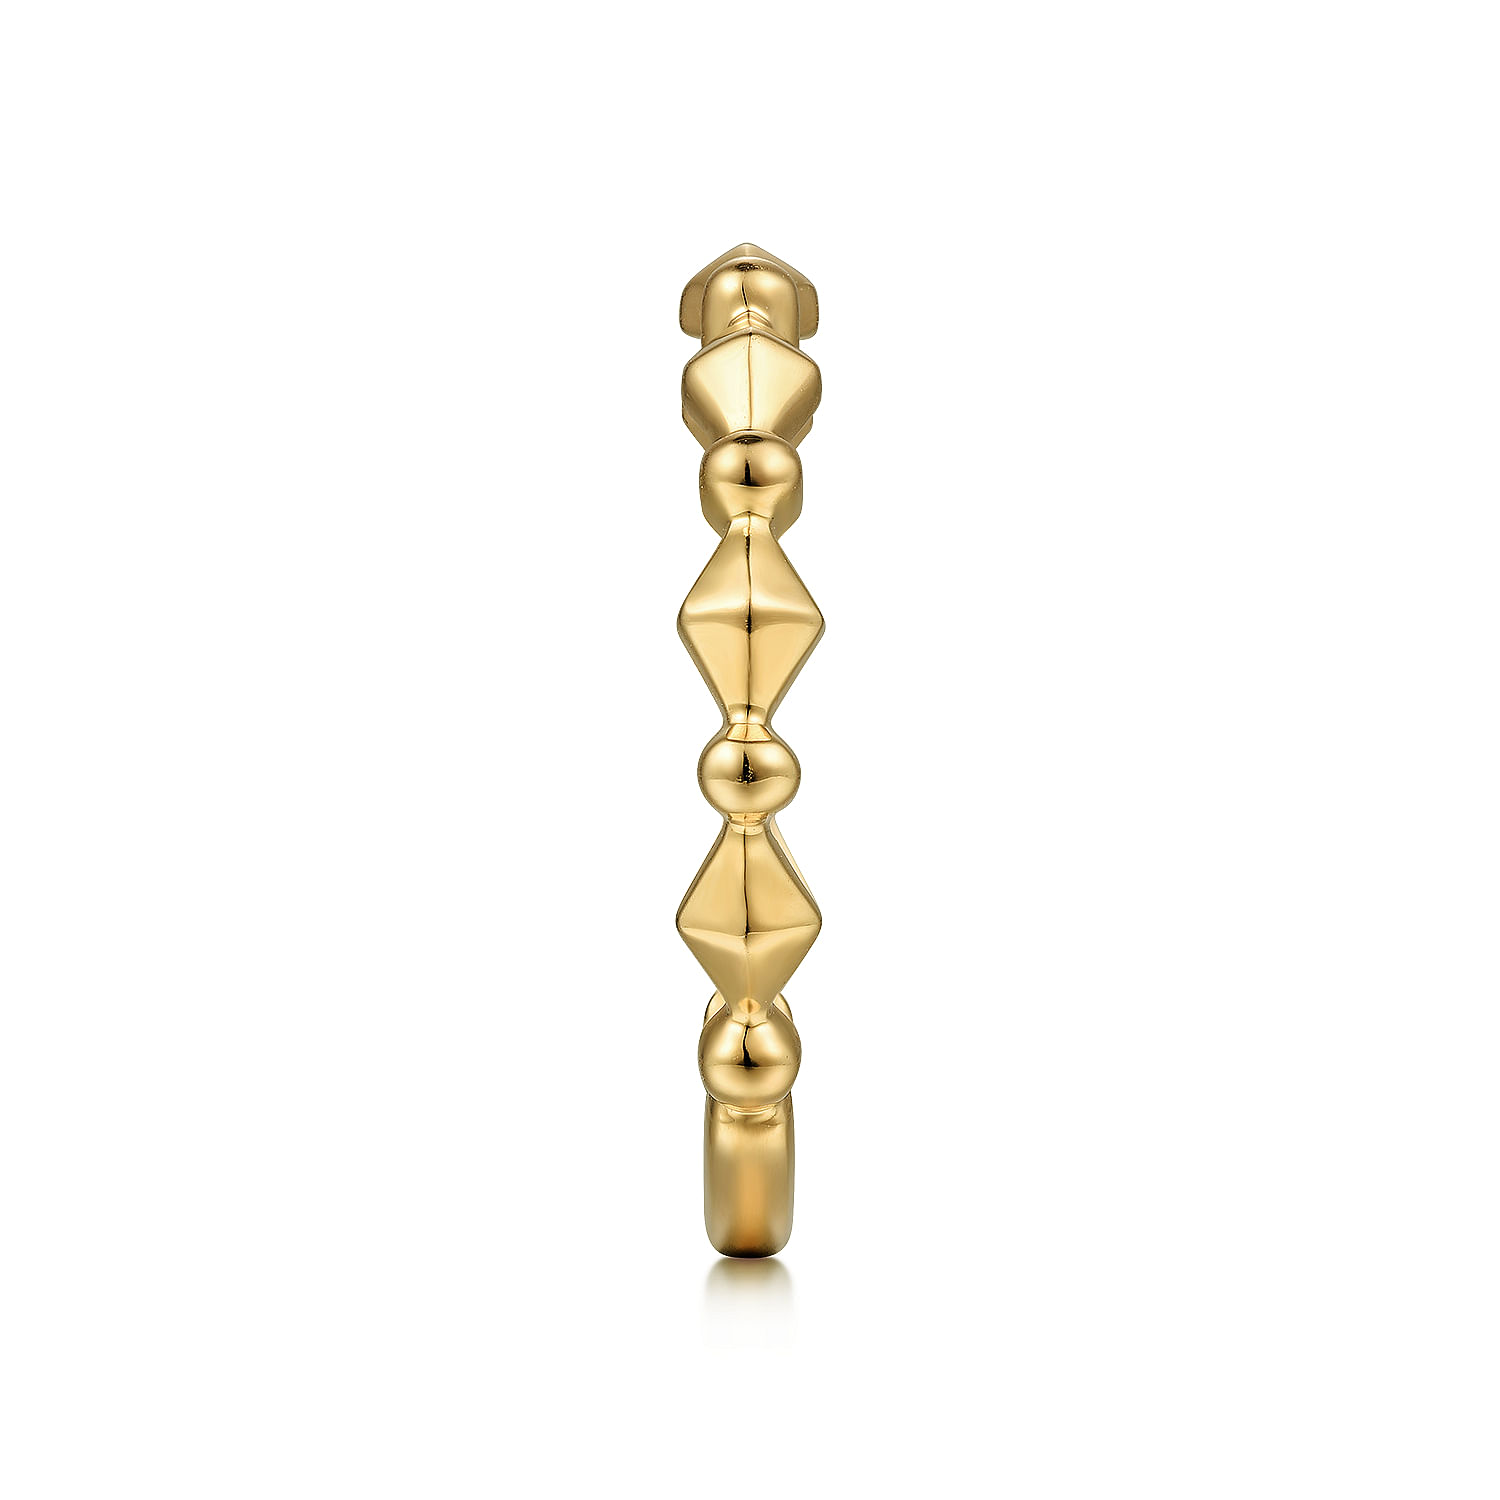 14K Yellow Gold Geometric Station Stackable Ring